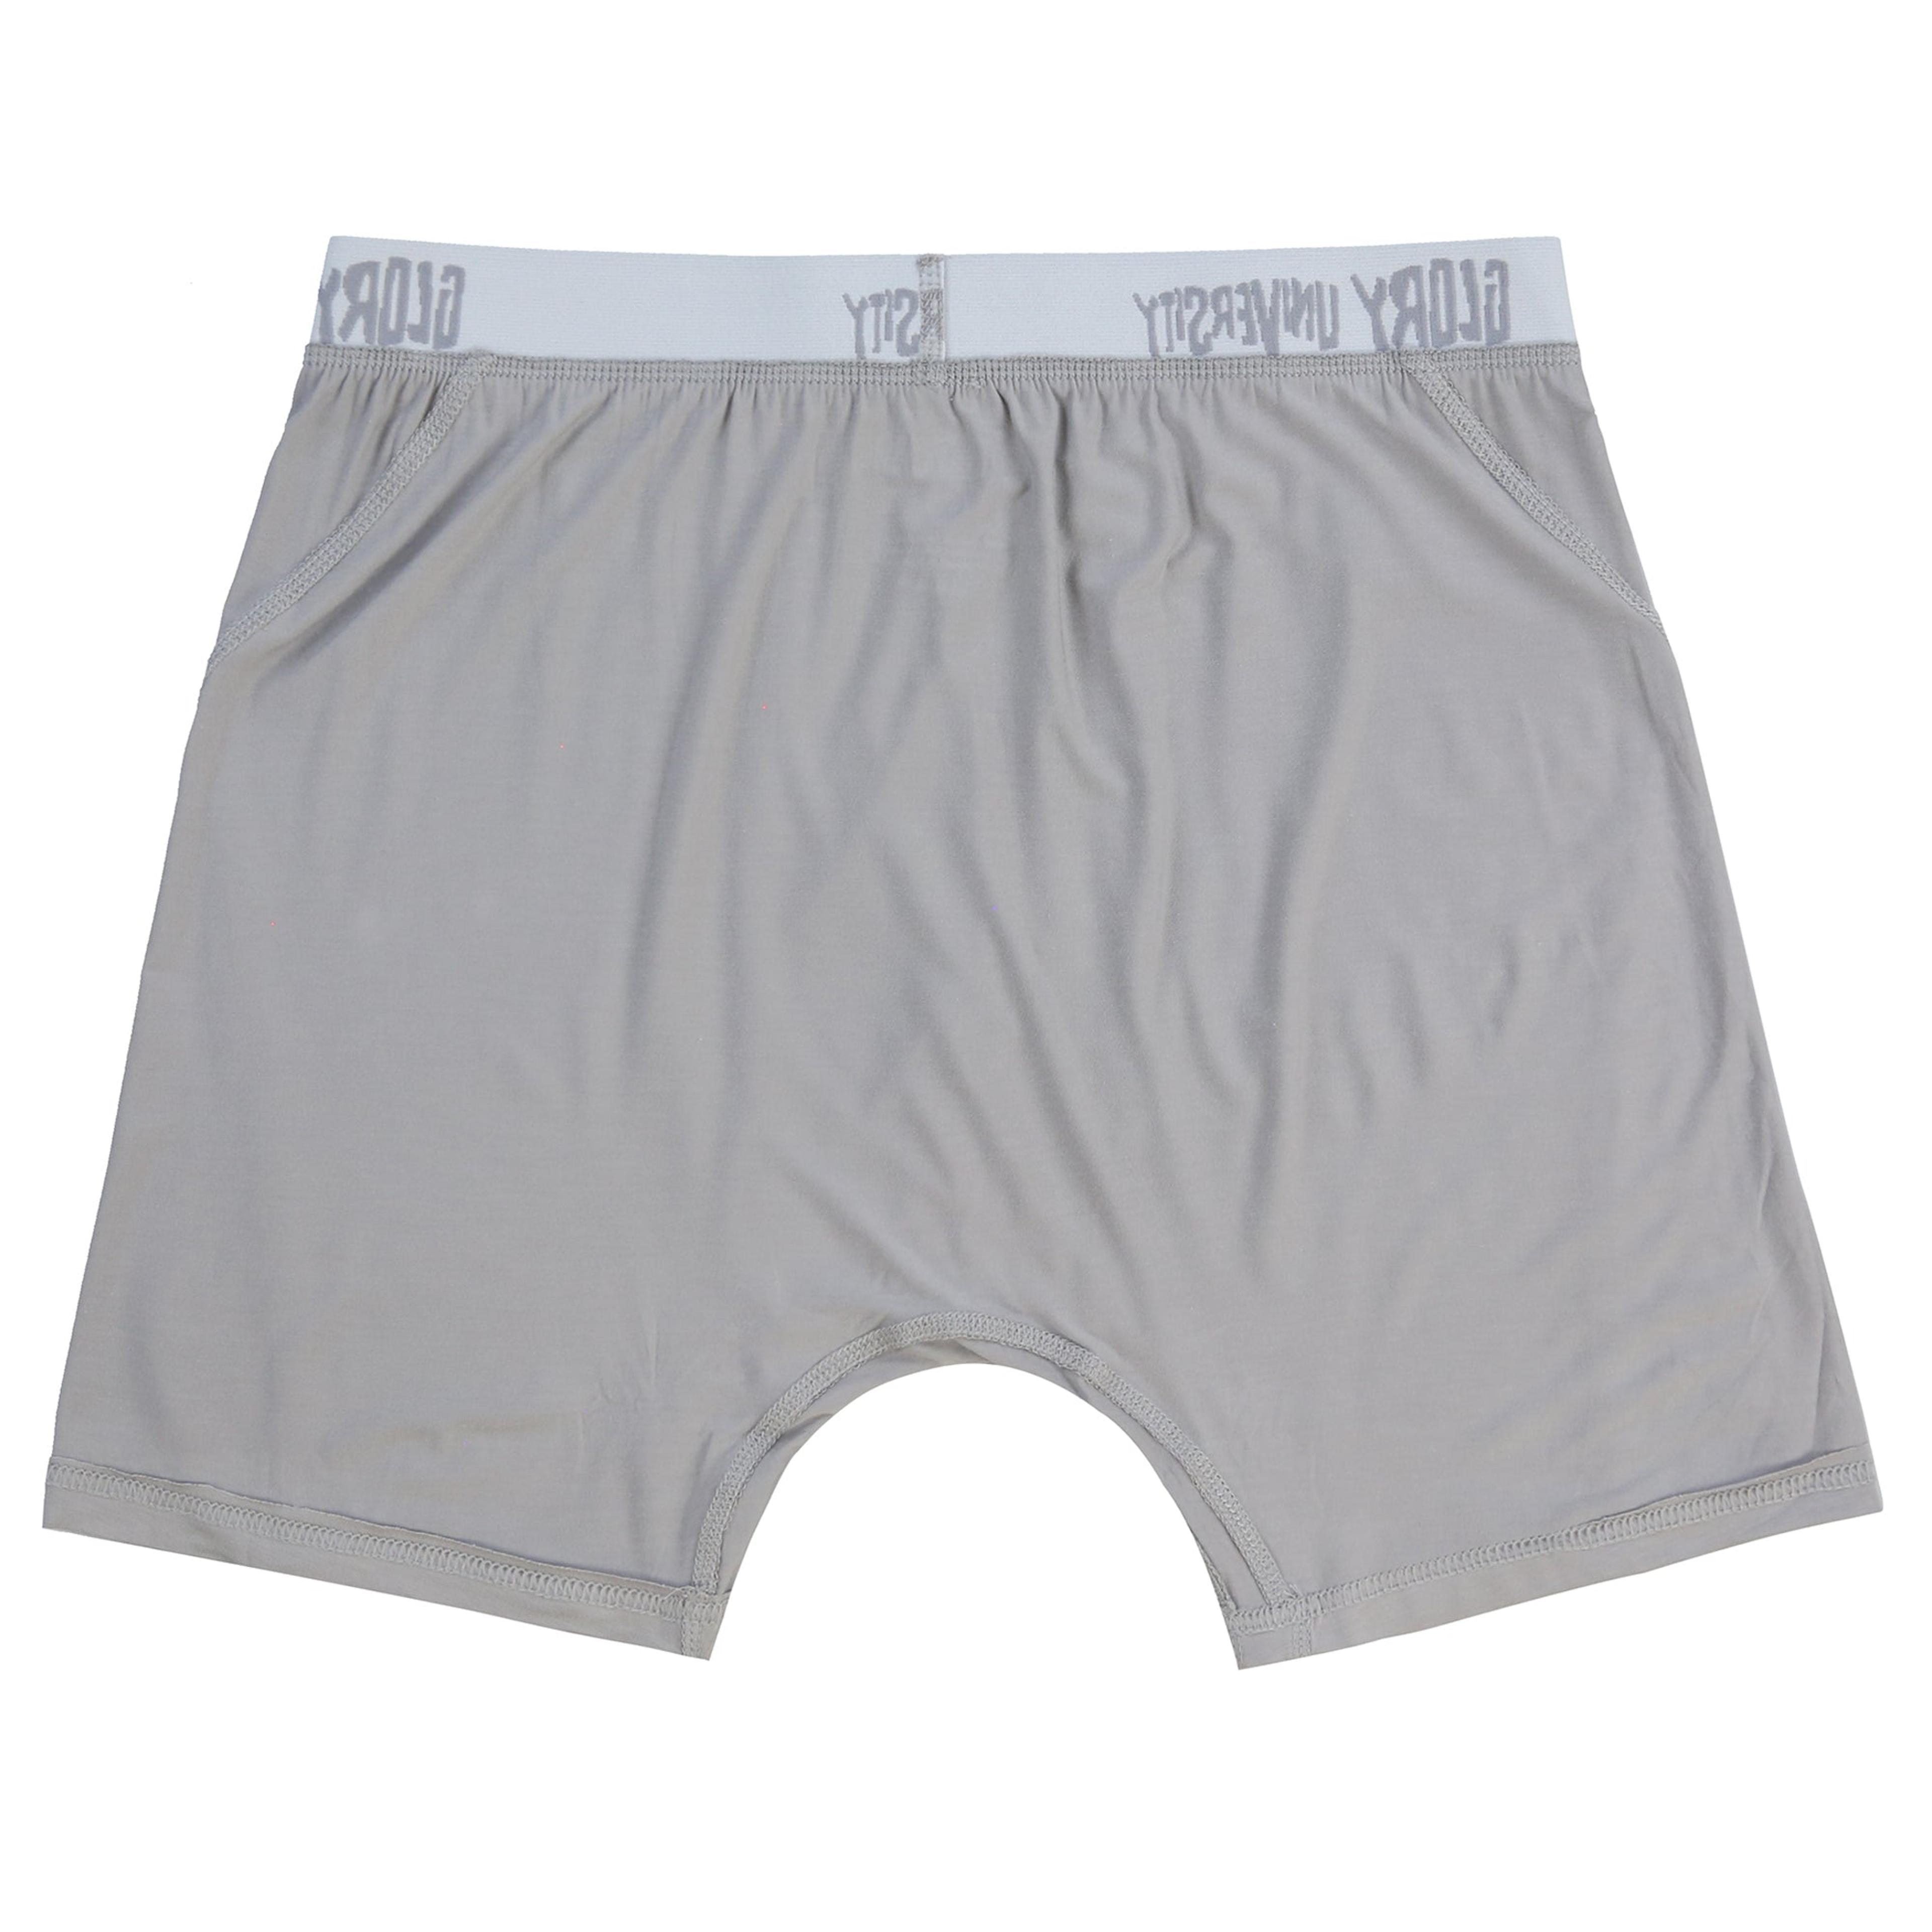 Alternate View 1 of Glo Gang Boxer Brief (Athletic Grey)